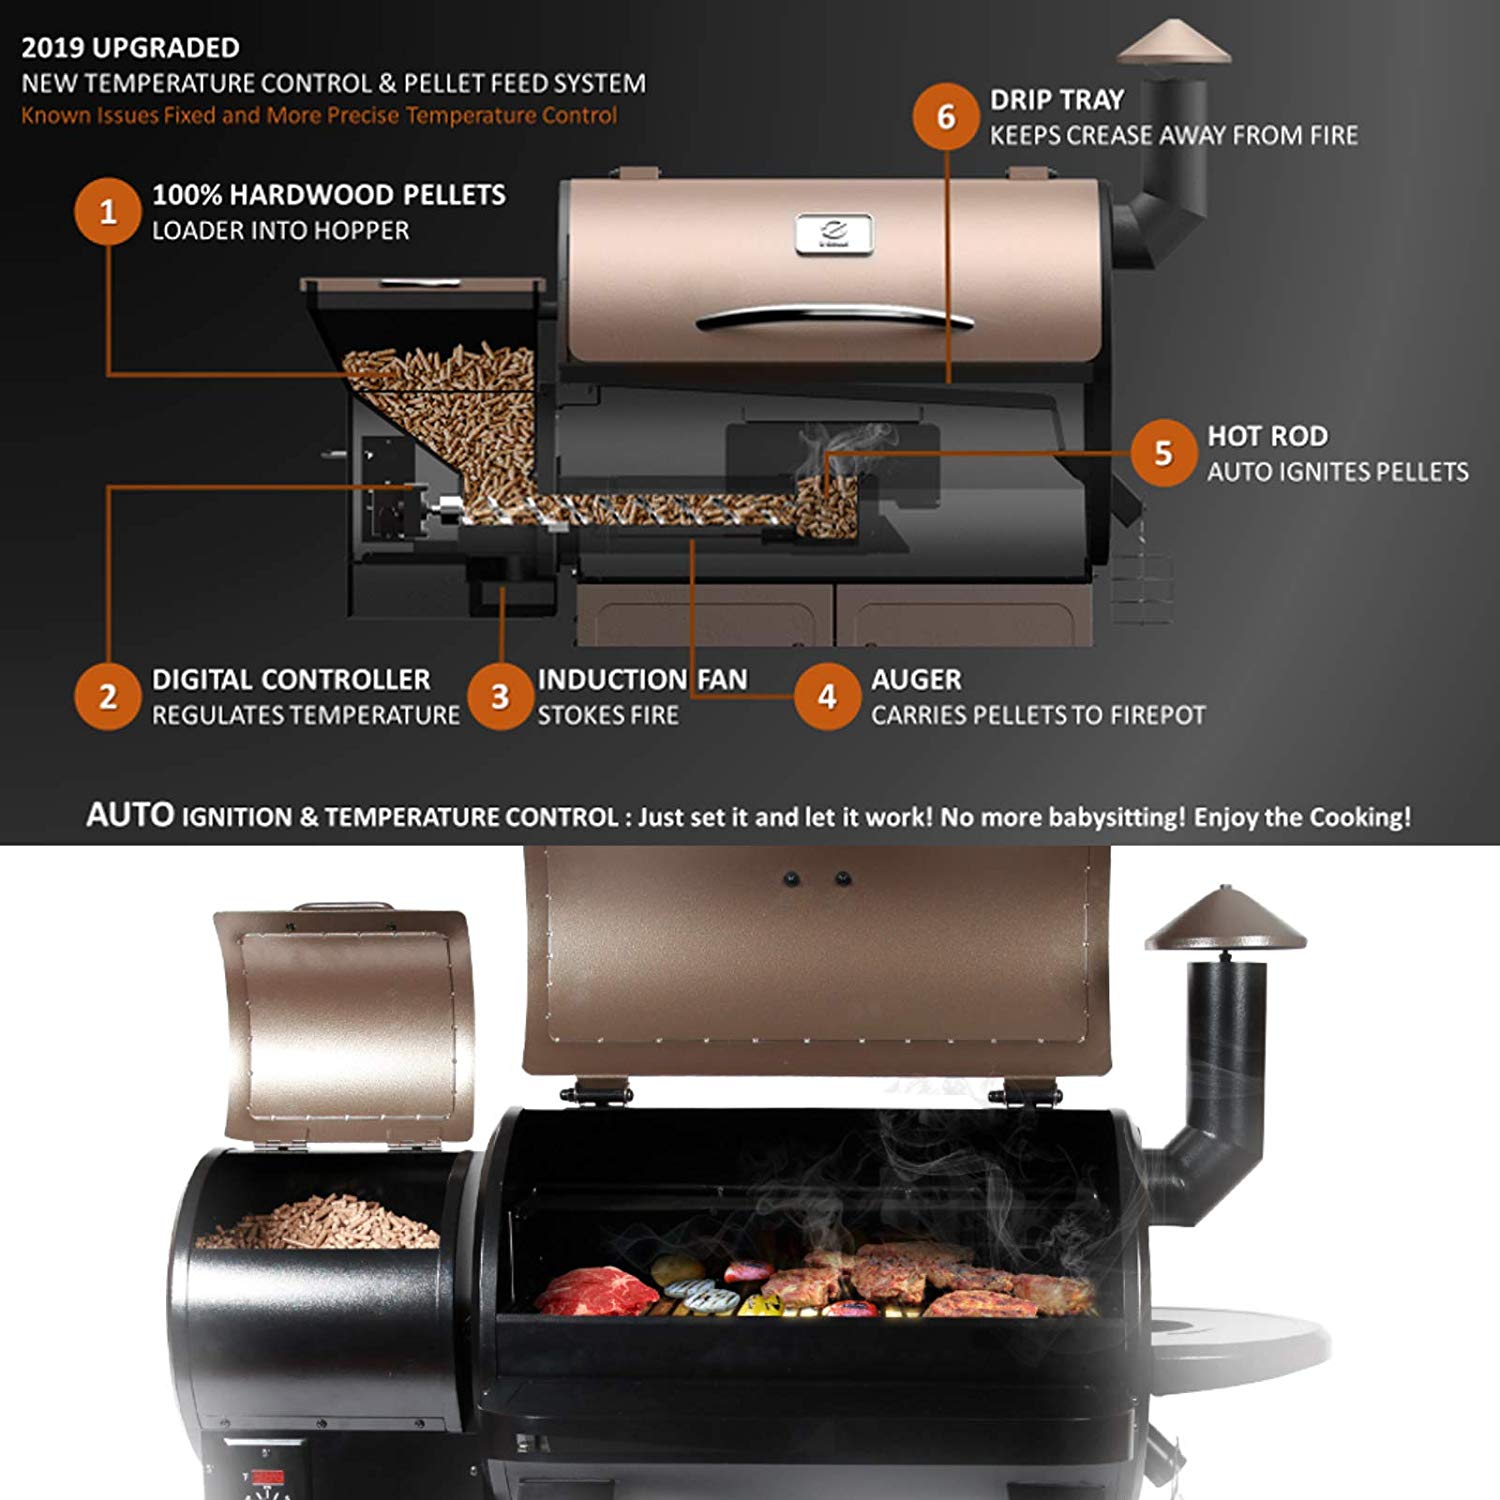 Z Grills ZPG-450A Upgrade Model Wood Pellet Grill & Smoker, 8 in 1 BBQ Grill Auto Temperature Control, 450 sq Inch Deal, Bronze & Black Cover Included - image 2 of 11